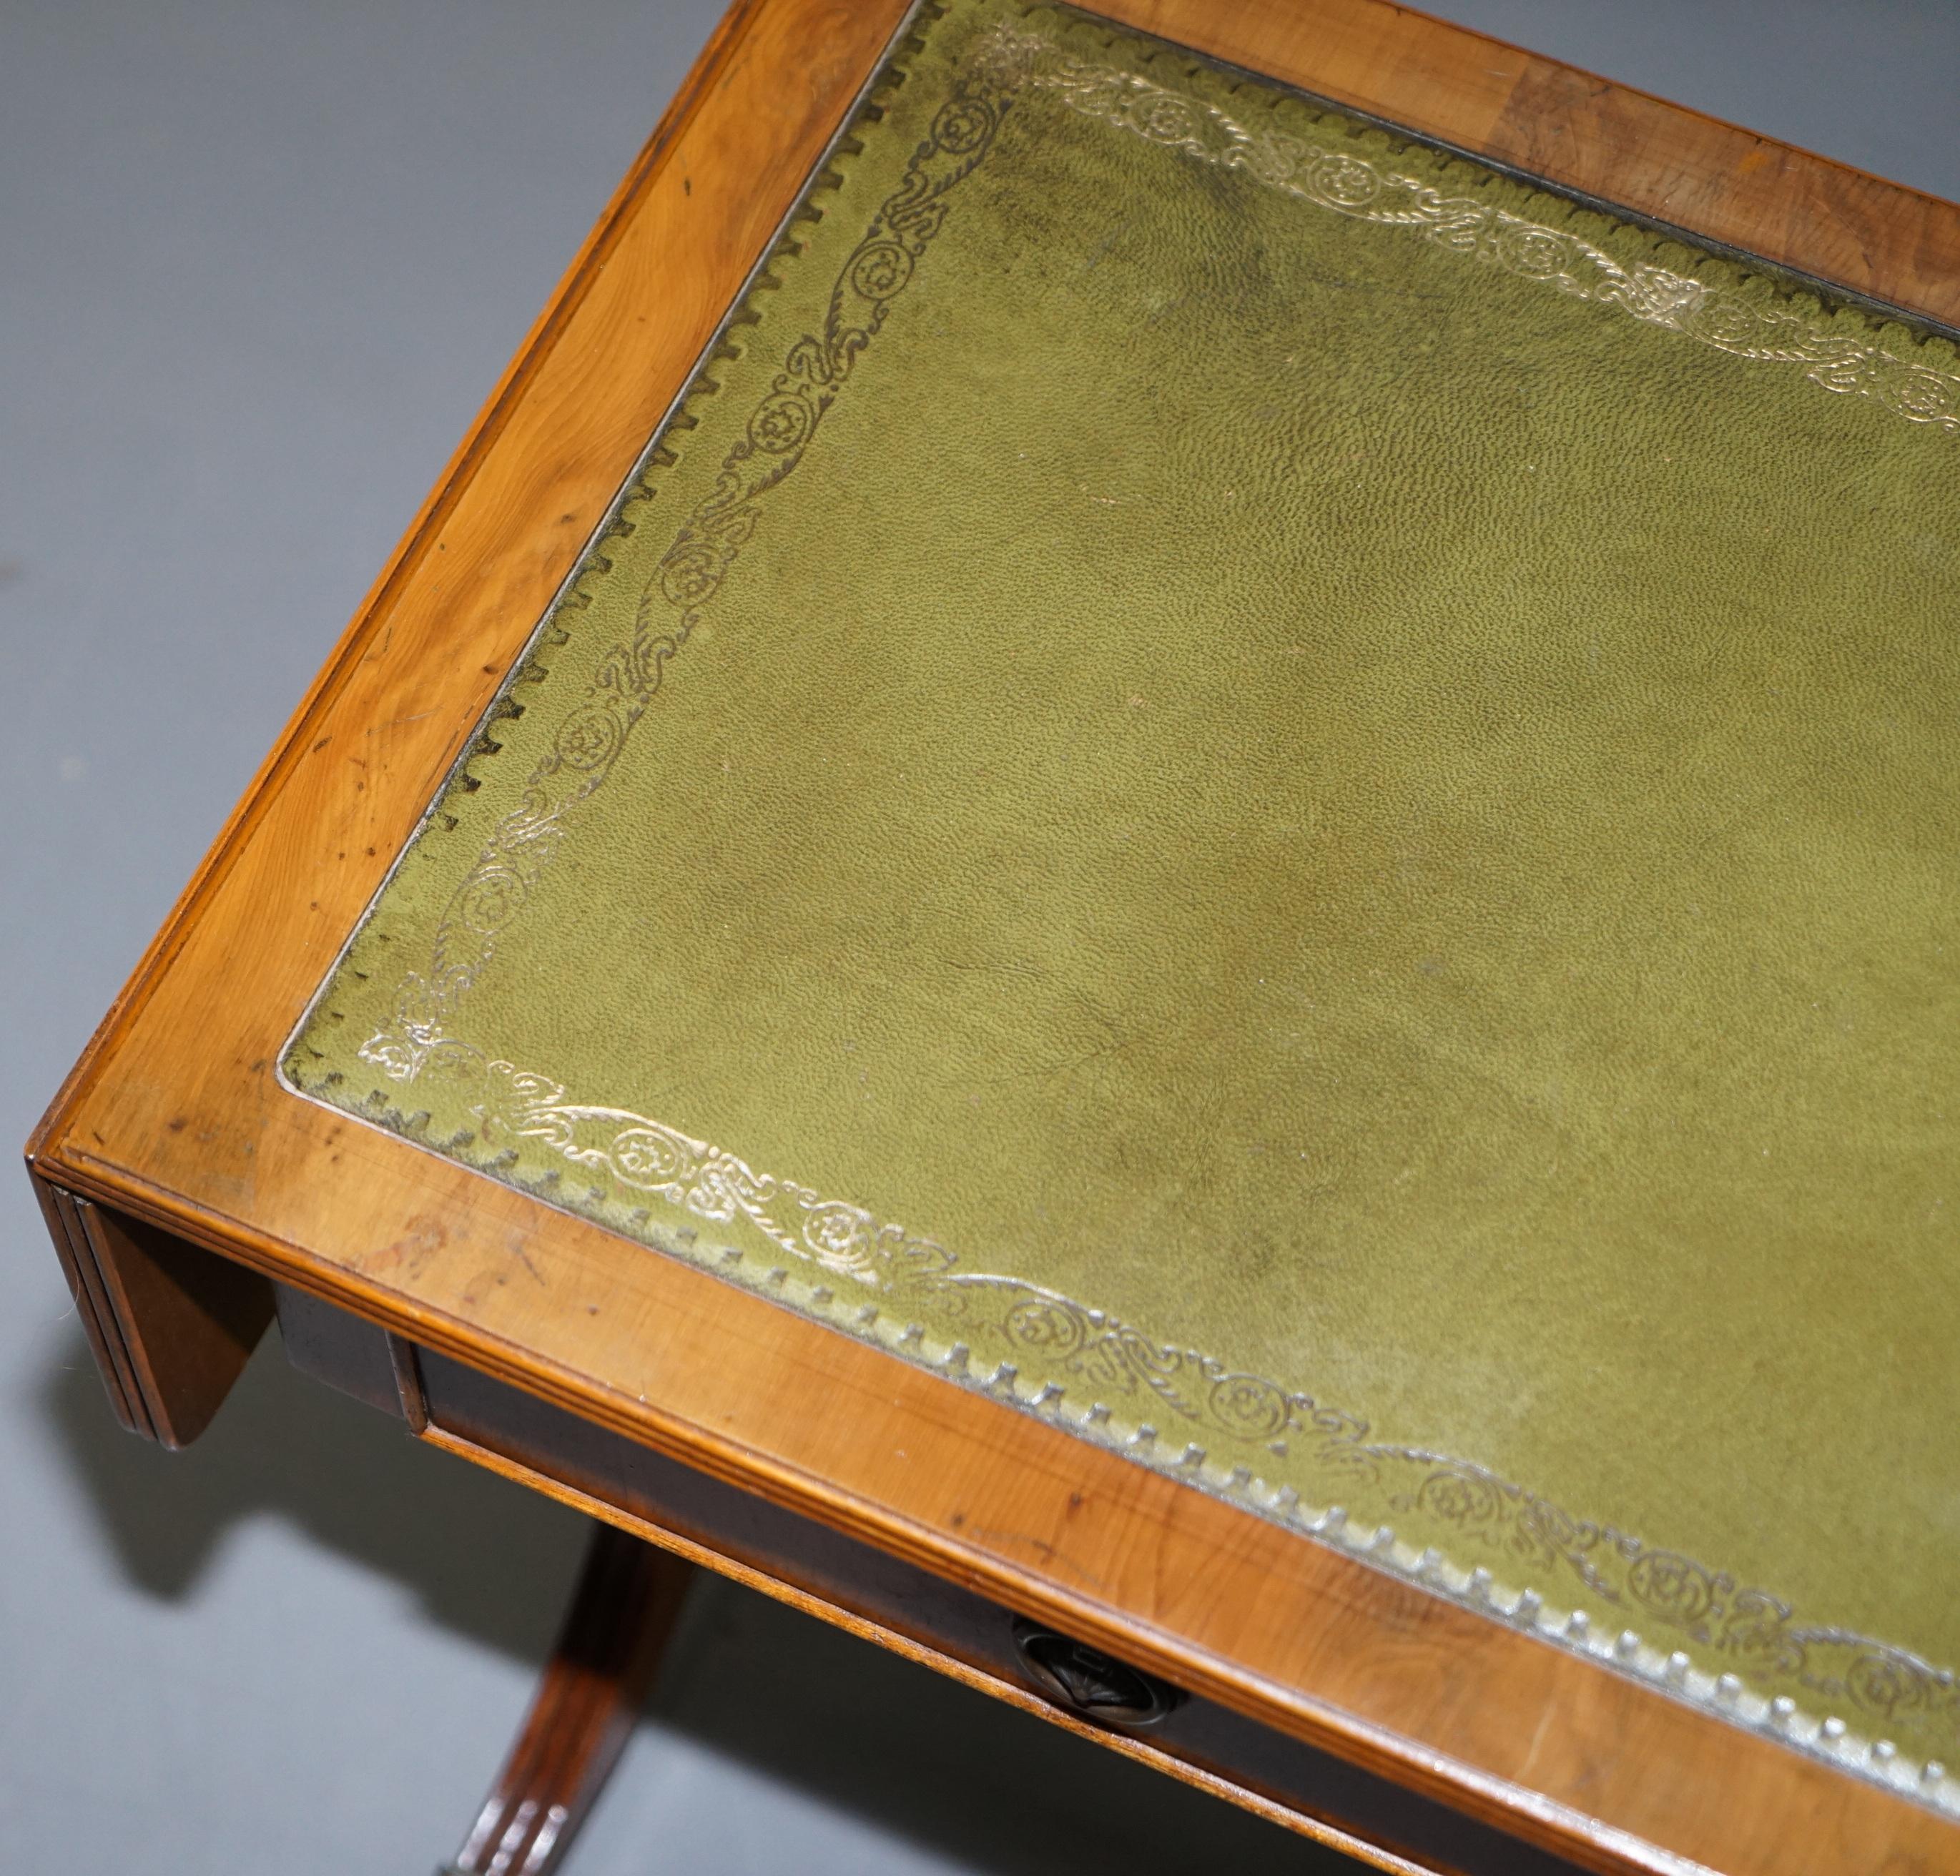 Hand-Crafted Stunning Small Side Table with Extending Green Leather Gold Leaf Embossed Top